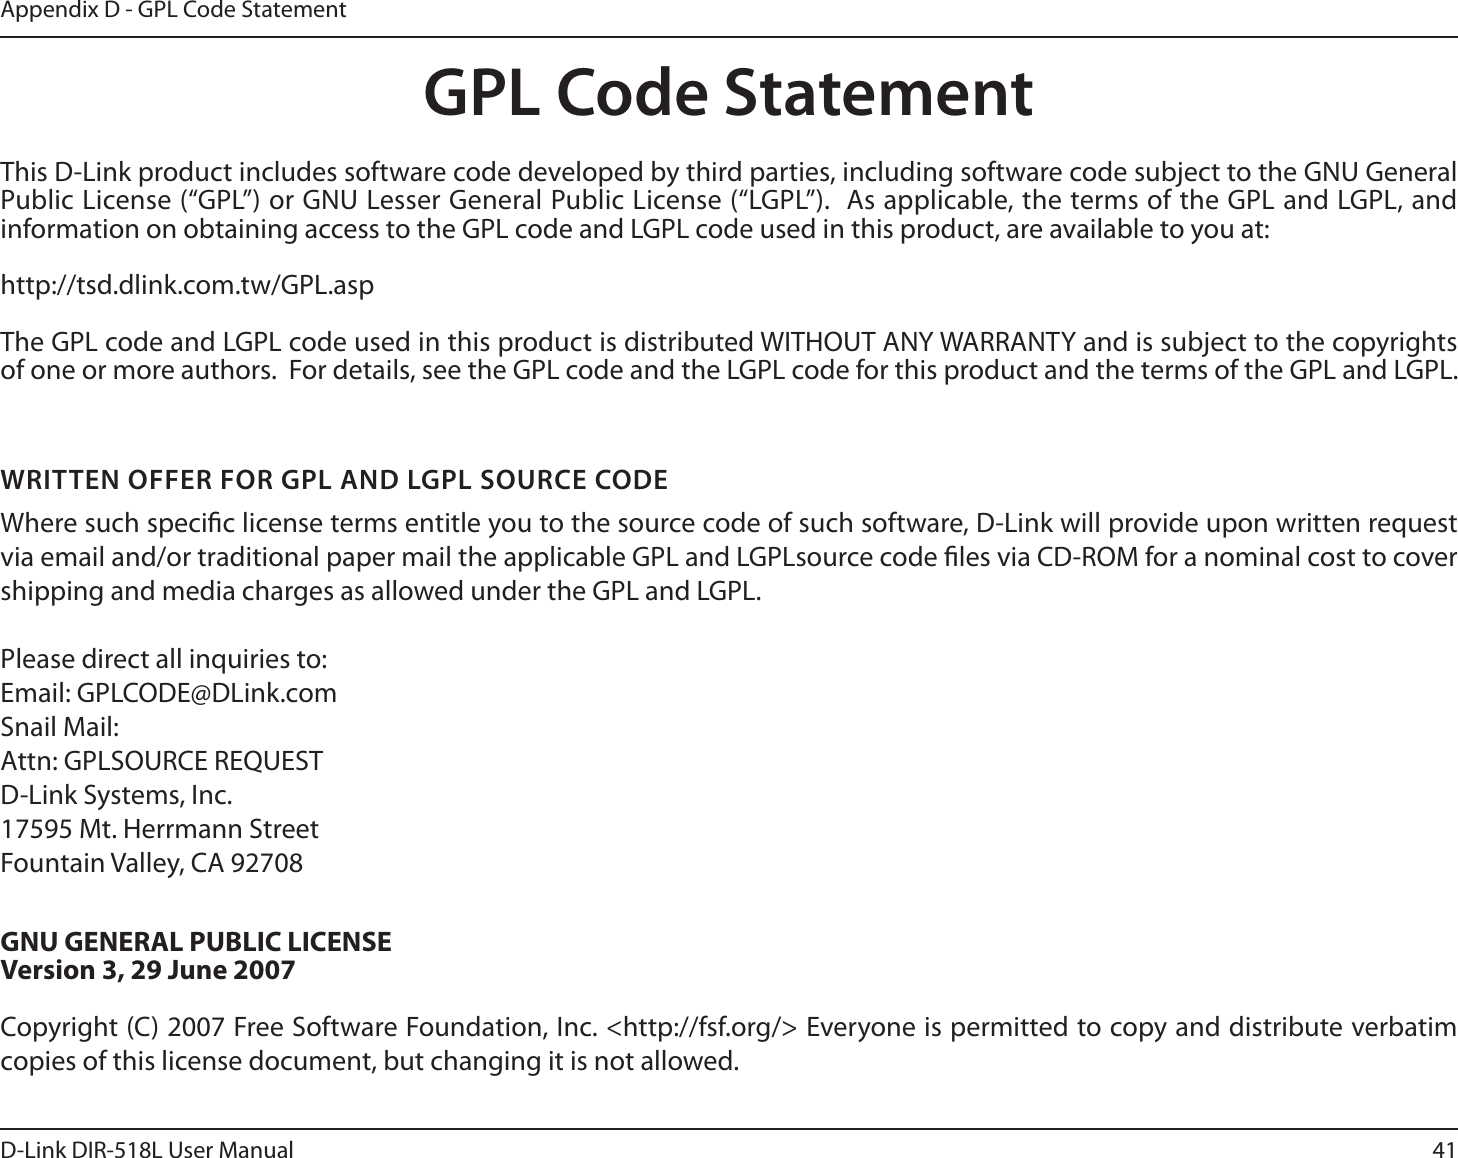 41D-Link DIR-518L User ManualAppendix D - GPL Code StatementGPL Code StatementThis D-Link product includes software code developed by third parties, including software code subject to the GNU General Public License (“GPL”) or GNU Lesser General Public License (“LGPL”).  As applicable, the terms of the GPL and LGPL, and information on obtaining access to the GPL code and LGPL code used in this product, are available to you at:http://tsd.dlink.com.tw/GPL.aspThe GPL code and LGPL code used in this product is distributed WITHOUT ANY WARRANTY and is subject to the copyrights of one or more authors.  For details, see the GPL code and the LGPL code for this product and the terms of the GPL and LGPL.WRITTEN OFFER FOR GPL AND LGPL SOURCE CODEWhere such specic license terms entitle you to the source code of such software, D-Link will provide upon written request via email and/or traditional paper mail the applicable GPL and LGPLsource code les via CD-ROM for a nominal cost to cover shipping and media charges as allowed under the GPL and LGPL.  Please direct all inquiries to:Email: GPLCODE@DLink.comSnail Mail:Attn: GPLSOURCE REQUESTD-Link Systems, Inc.17595 Mt. Herrmann StreetFountain Valley, CA 92708GNU GENERAL PUBLIC LICENSEVersion 3, 29 June 2007Copyright (C) 2007 Free Software Foundation, Inc. &lt;http://fsf.org/&gt; Everyone is permitted to copy and distribute verbatim copies of this license document, but changing it is not allowed.